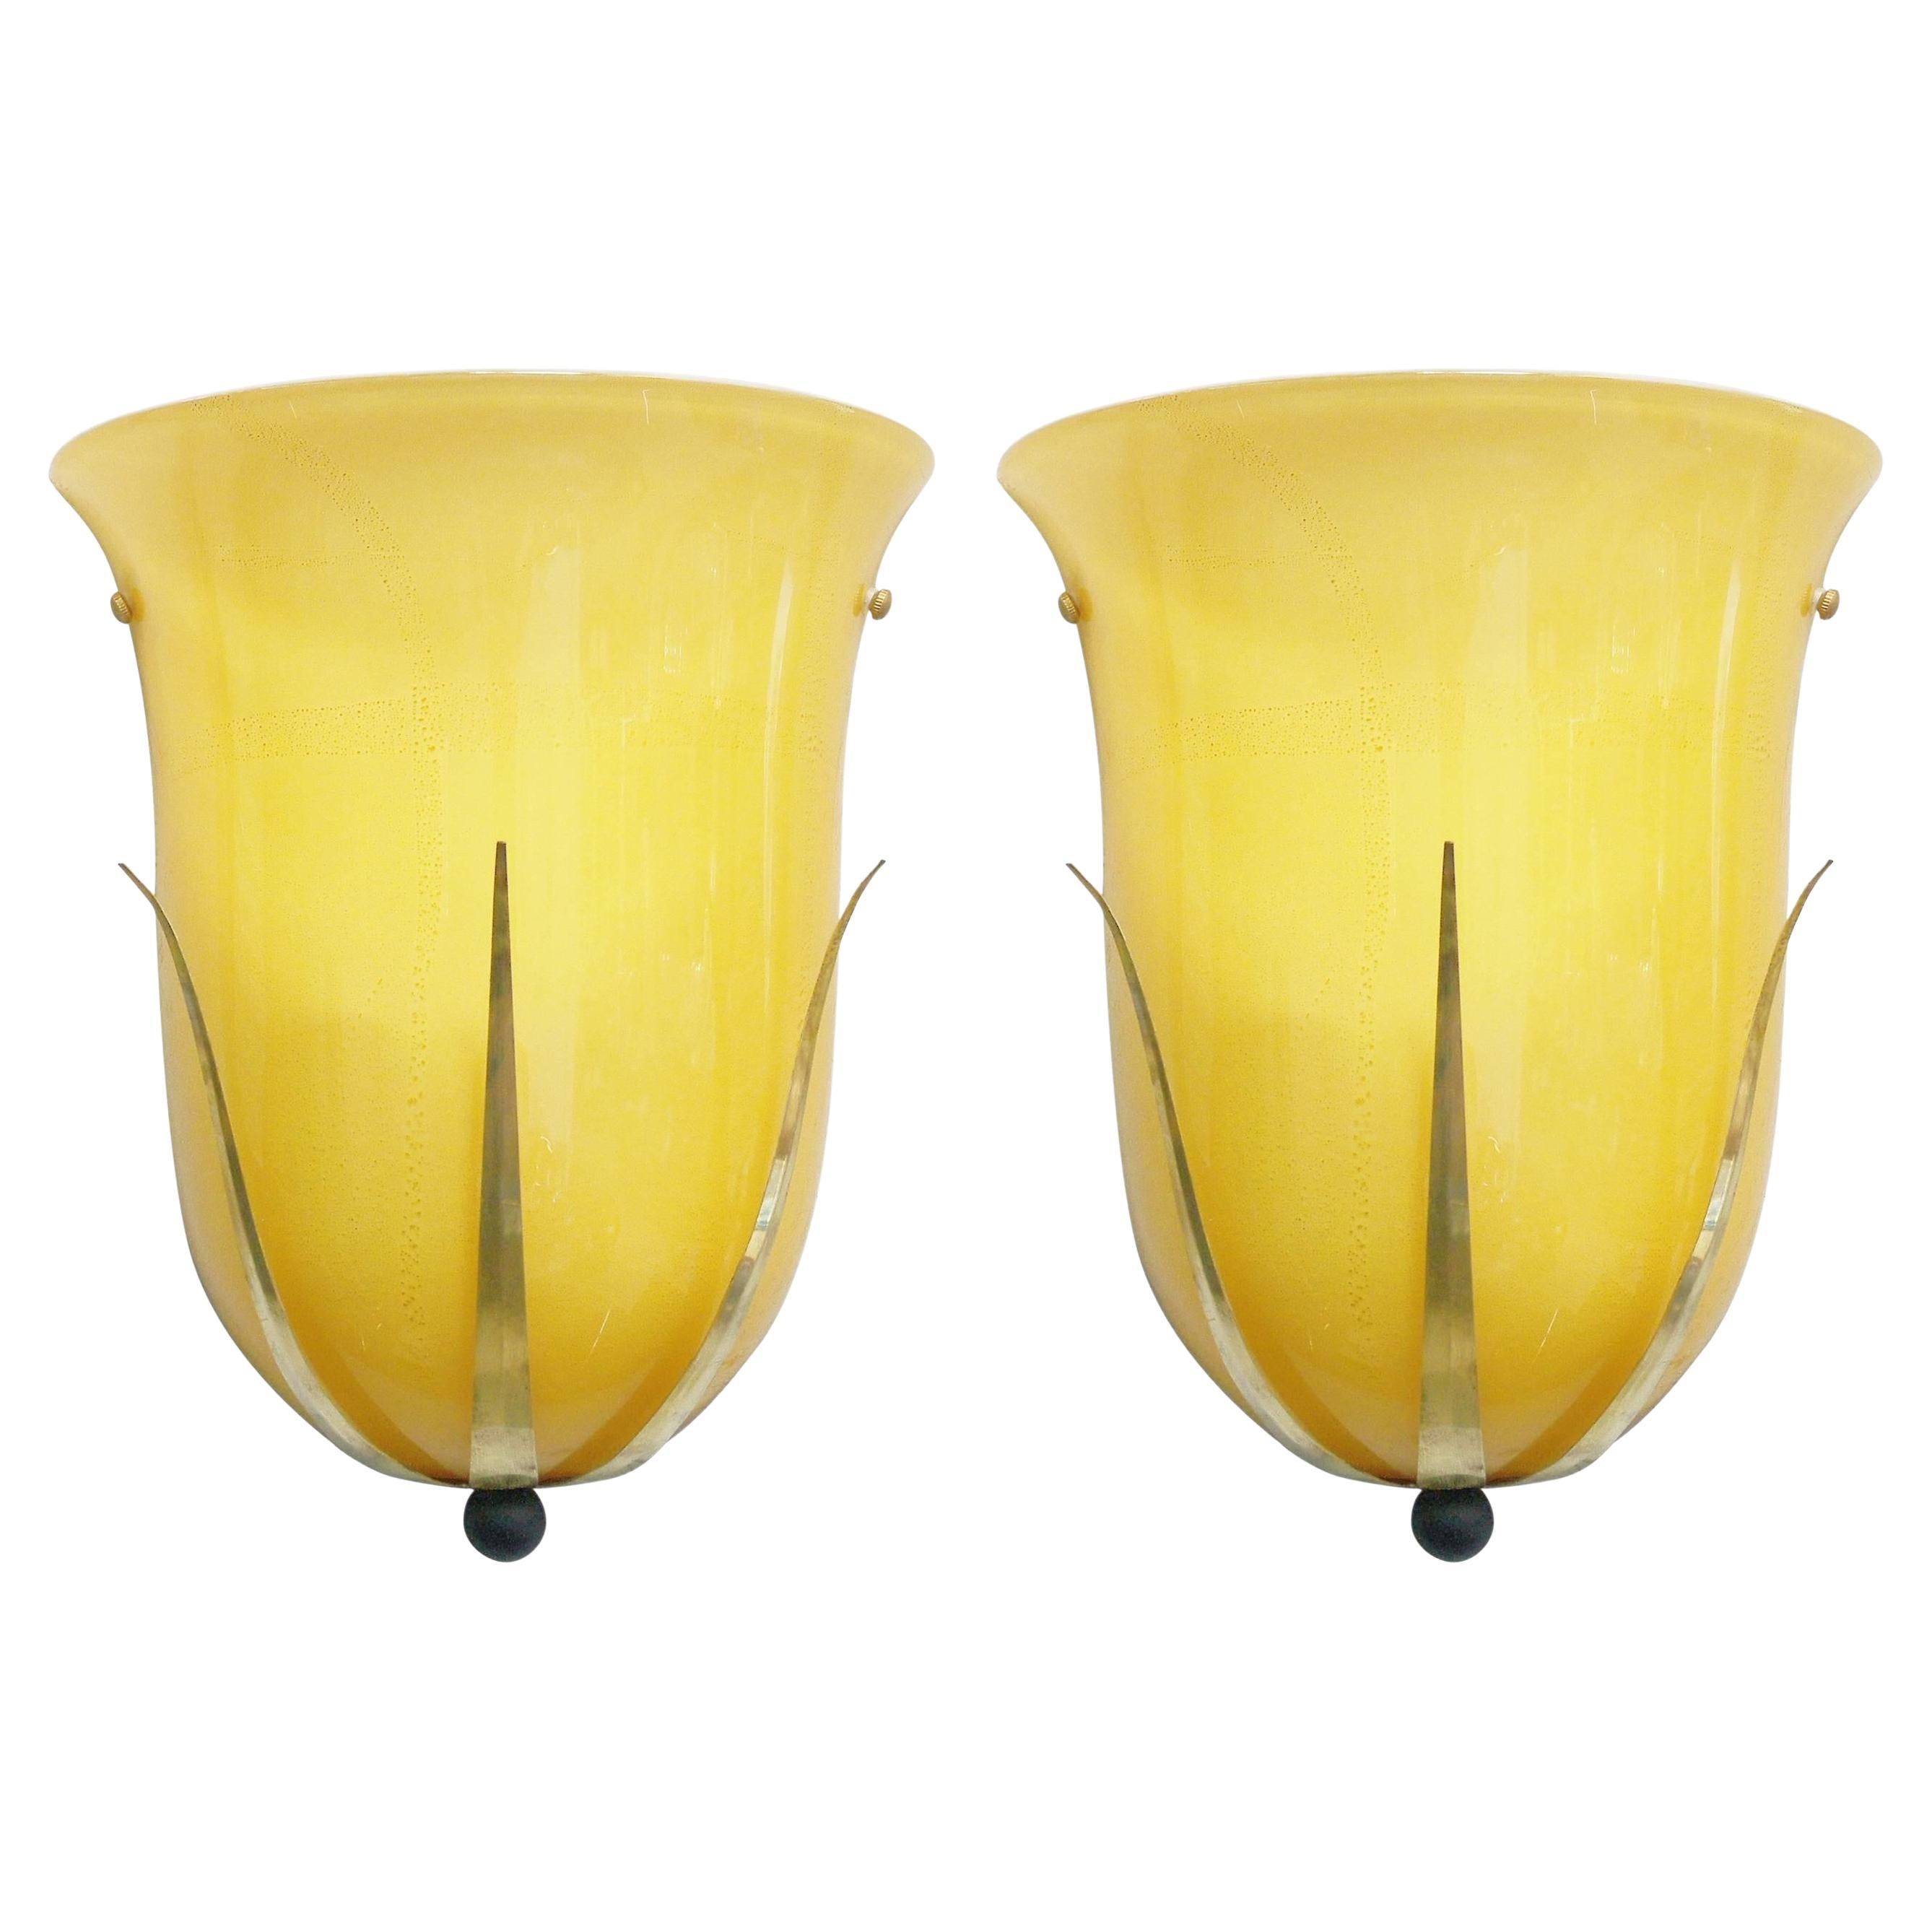 Pair of Vintage Italian Sconces w/ Hand B Amber Murano Glass by Leucos, c 1960s For Sale